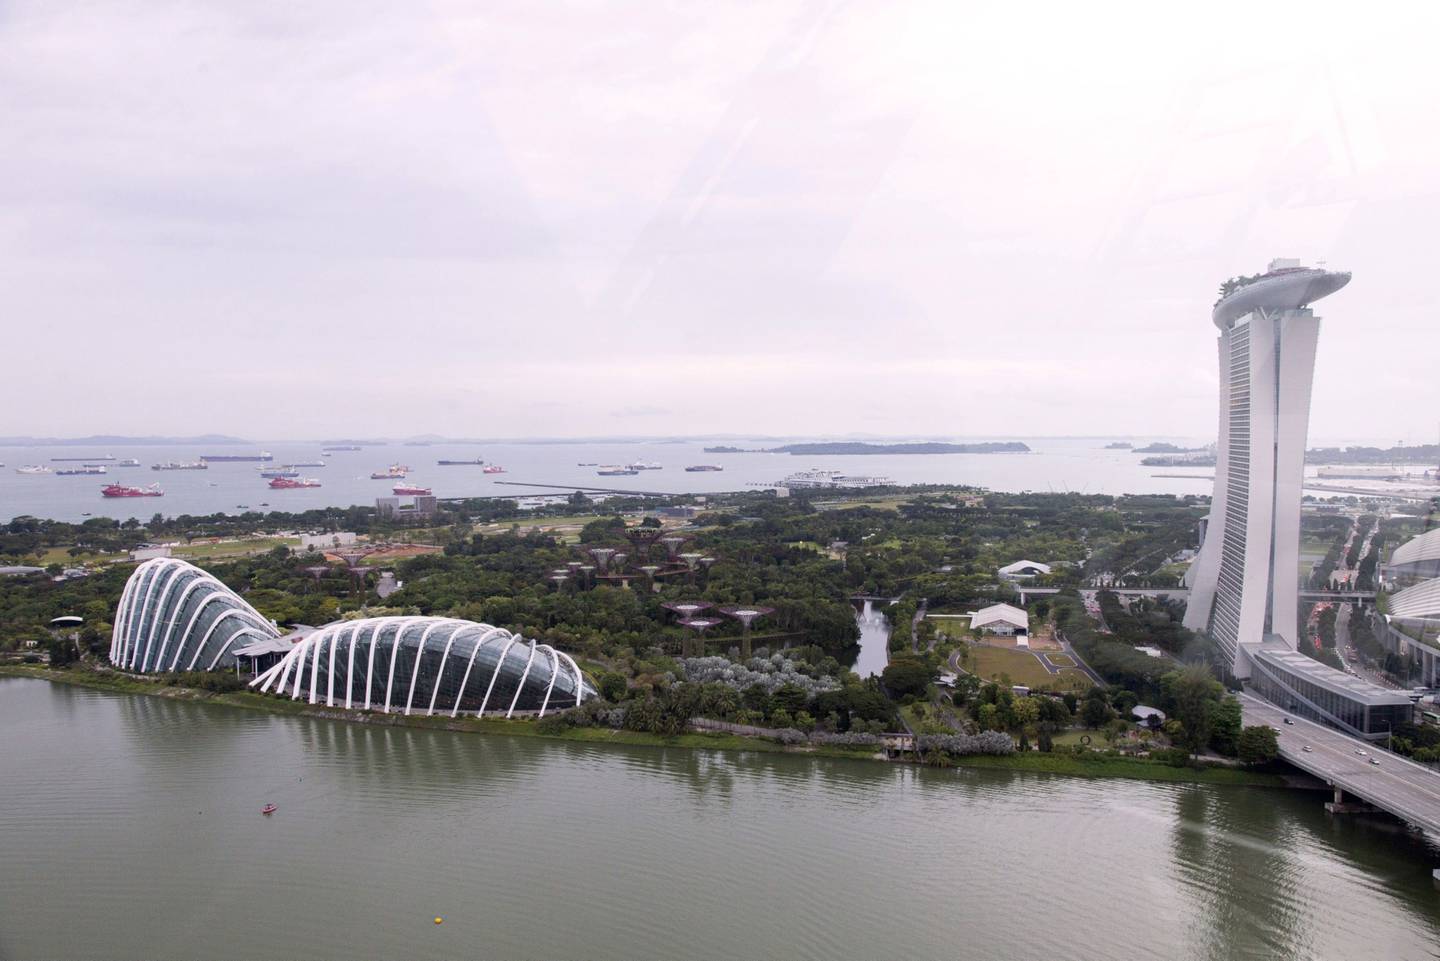 The Gardens By The Bay and Marina Bay Sands in Singapore. Bloomberg